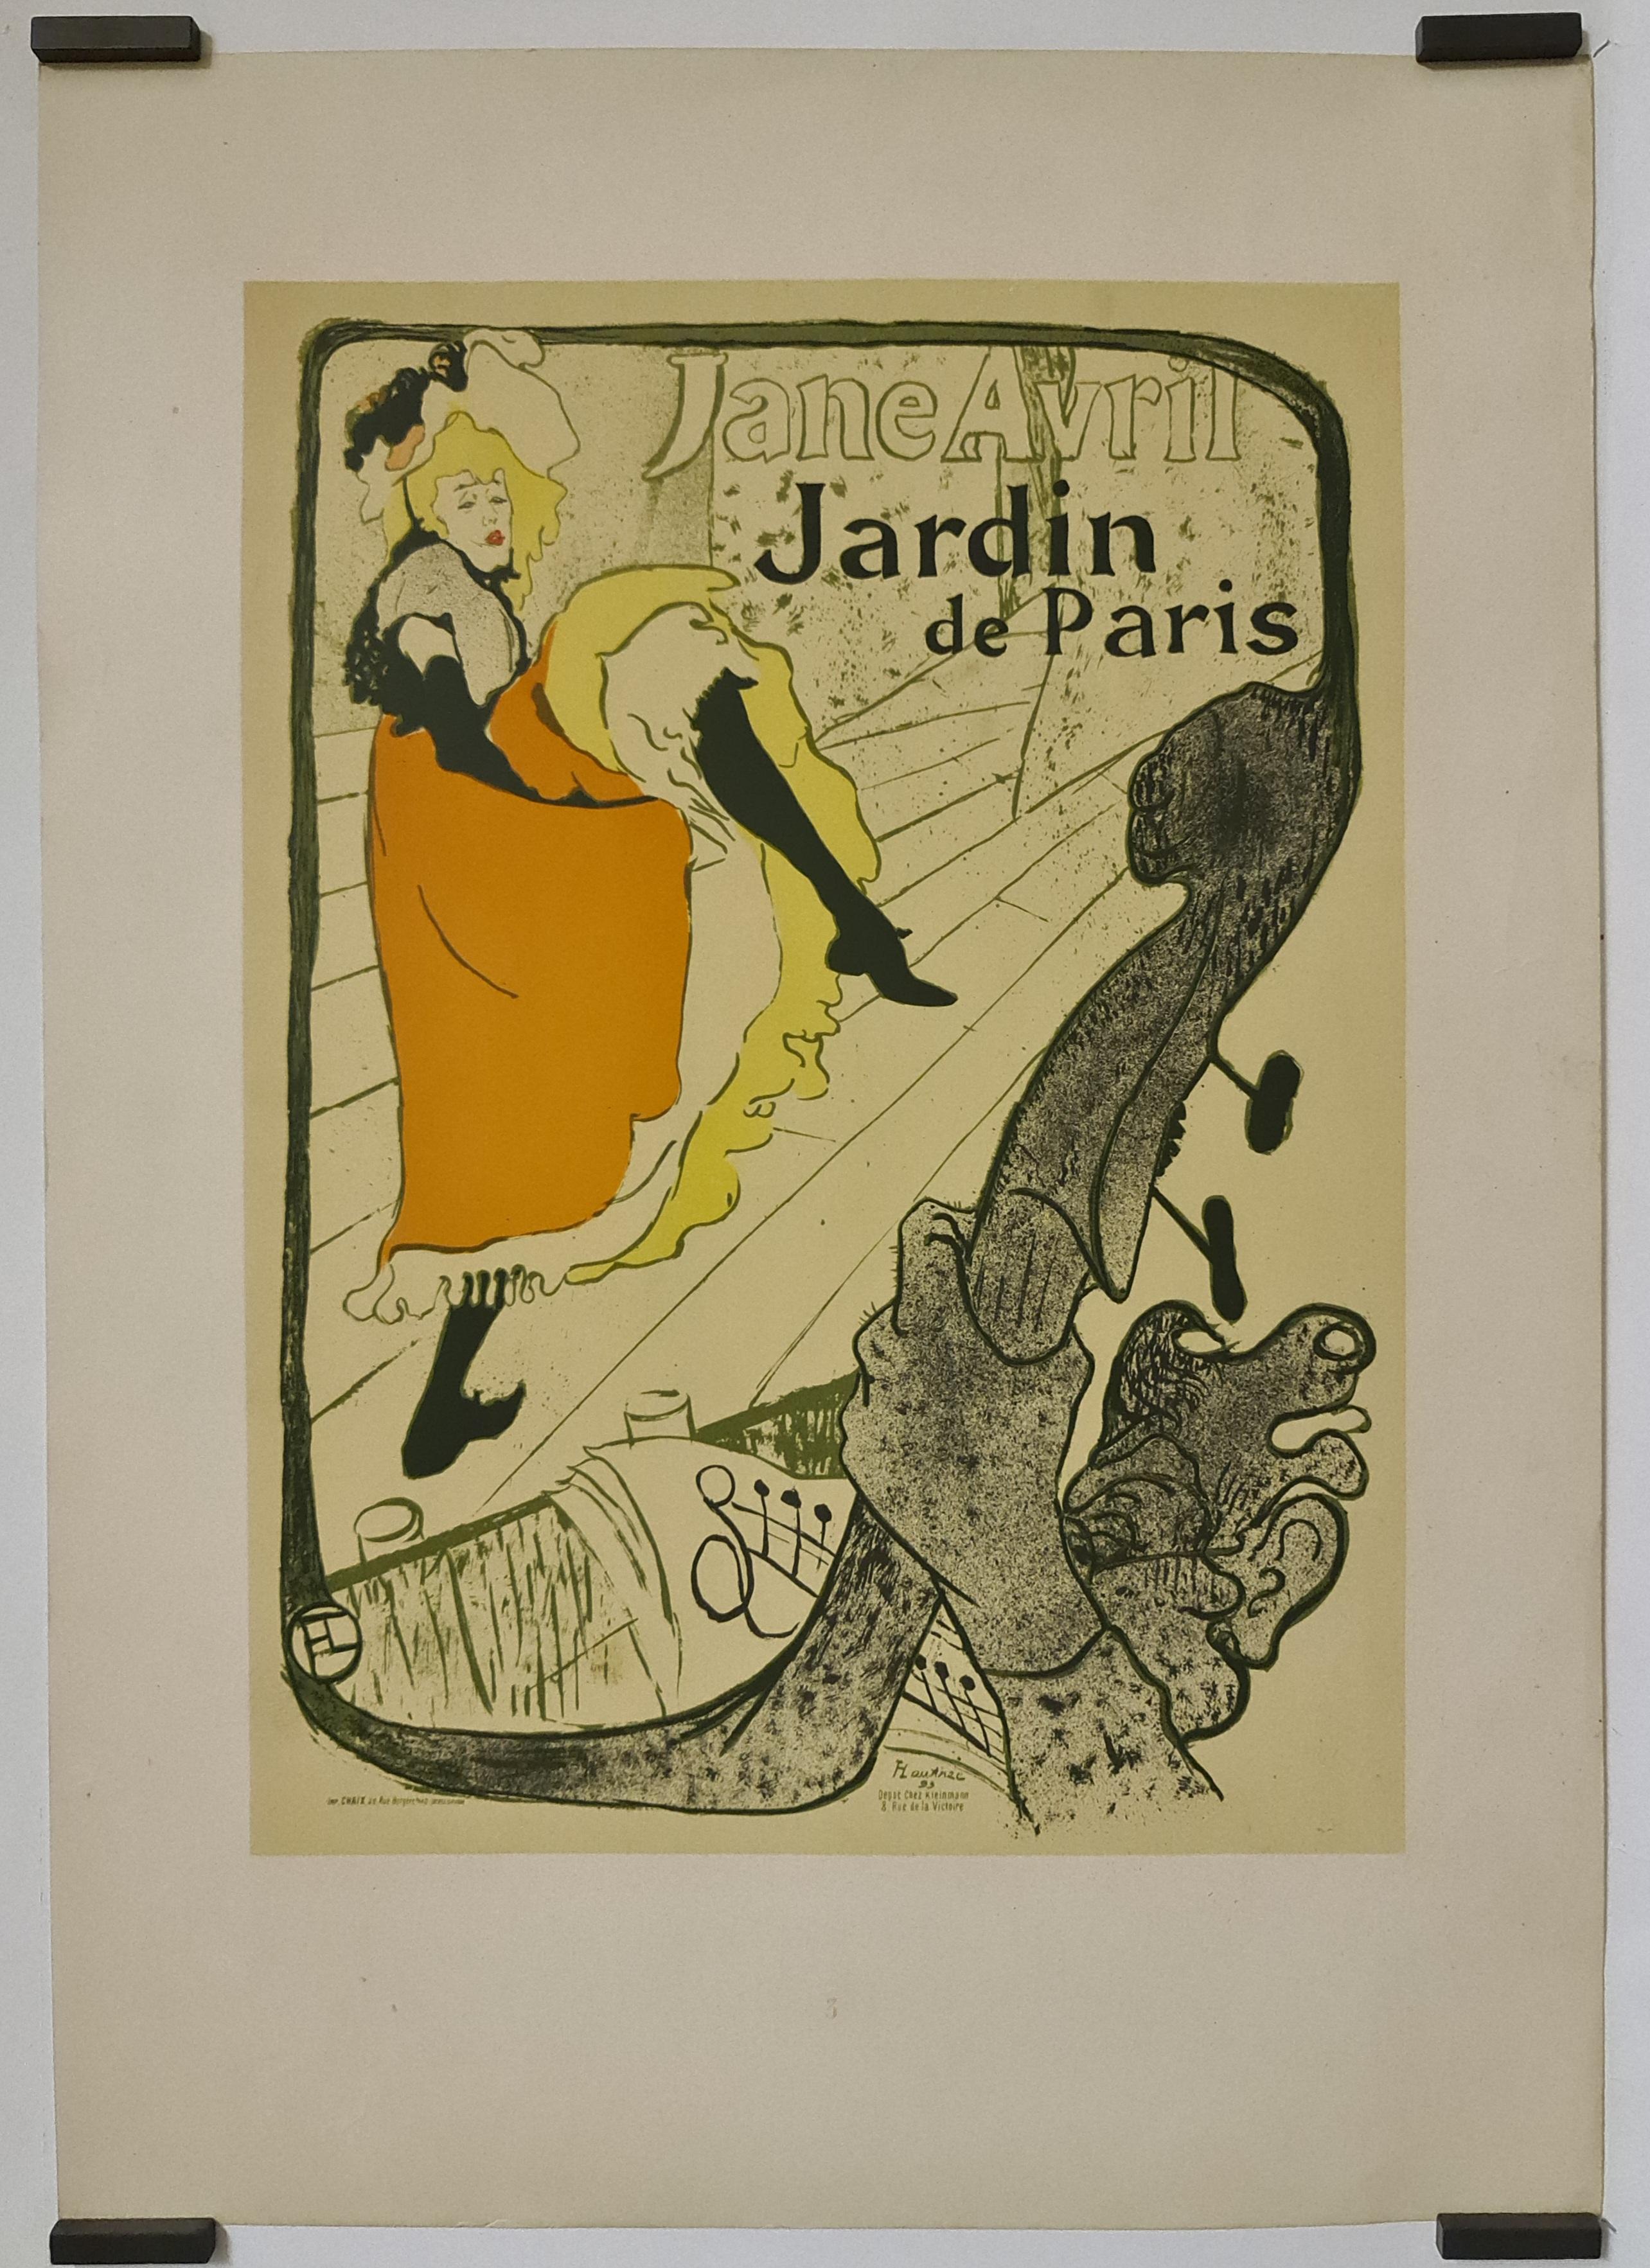 Lautrec's graphic posters, intended for artists, such as Jane Avril, or dance halls, such as the Moulin Rouge, embody the bubbling, frenetic spirit of nightlife in fin de siècle Paris. Avril, a longtime friend of the artist, commissioned this print